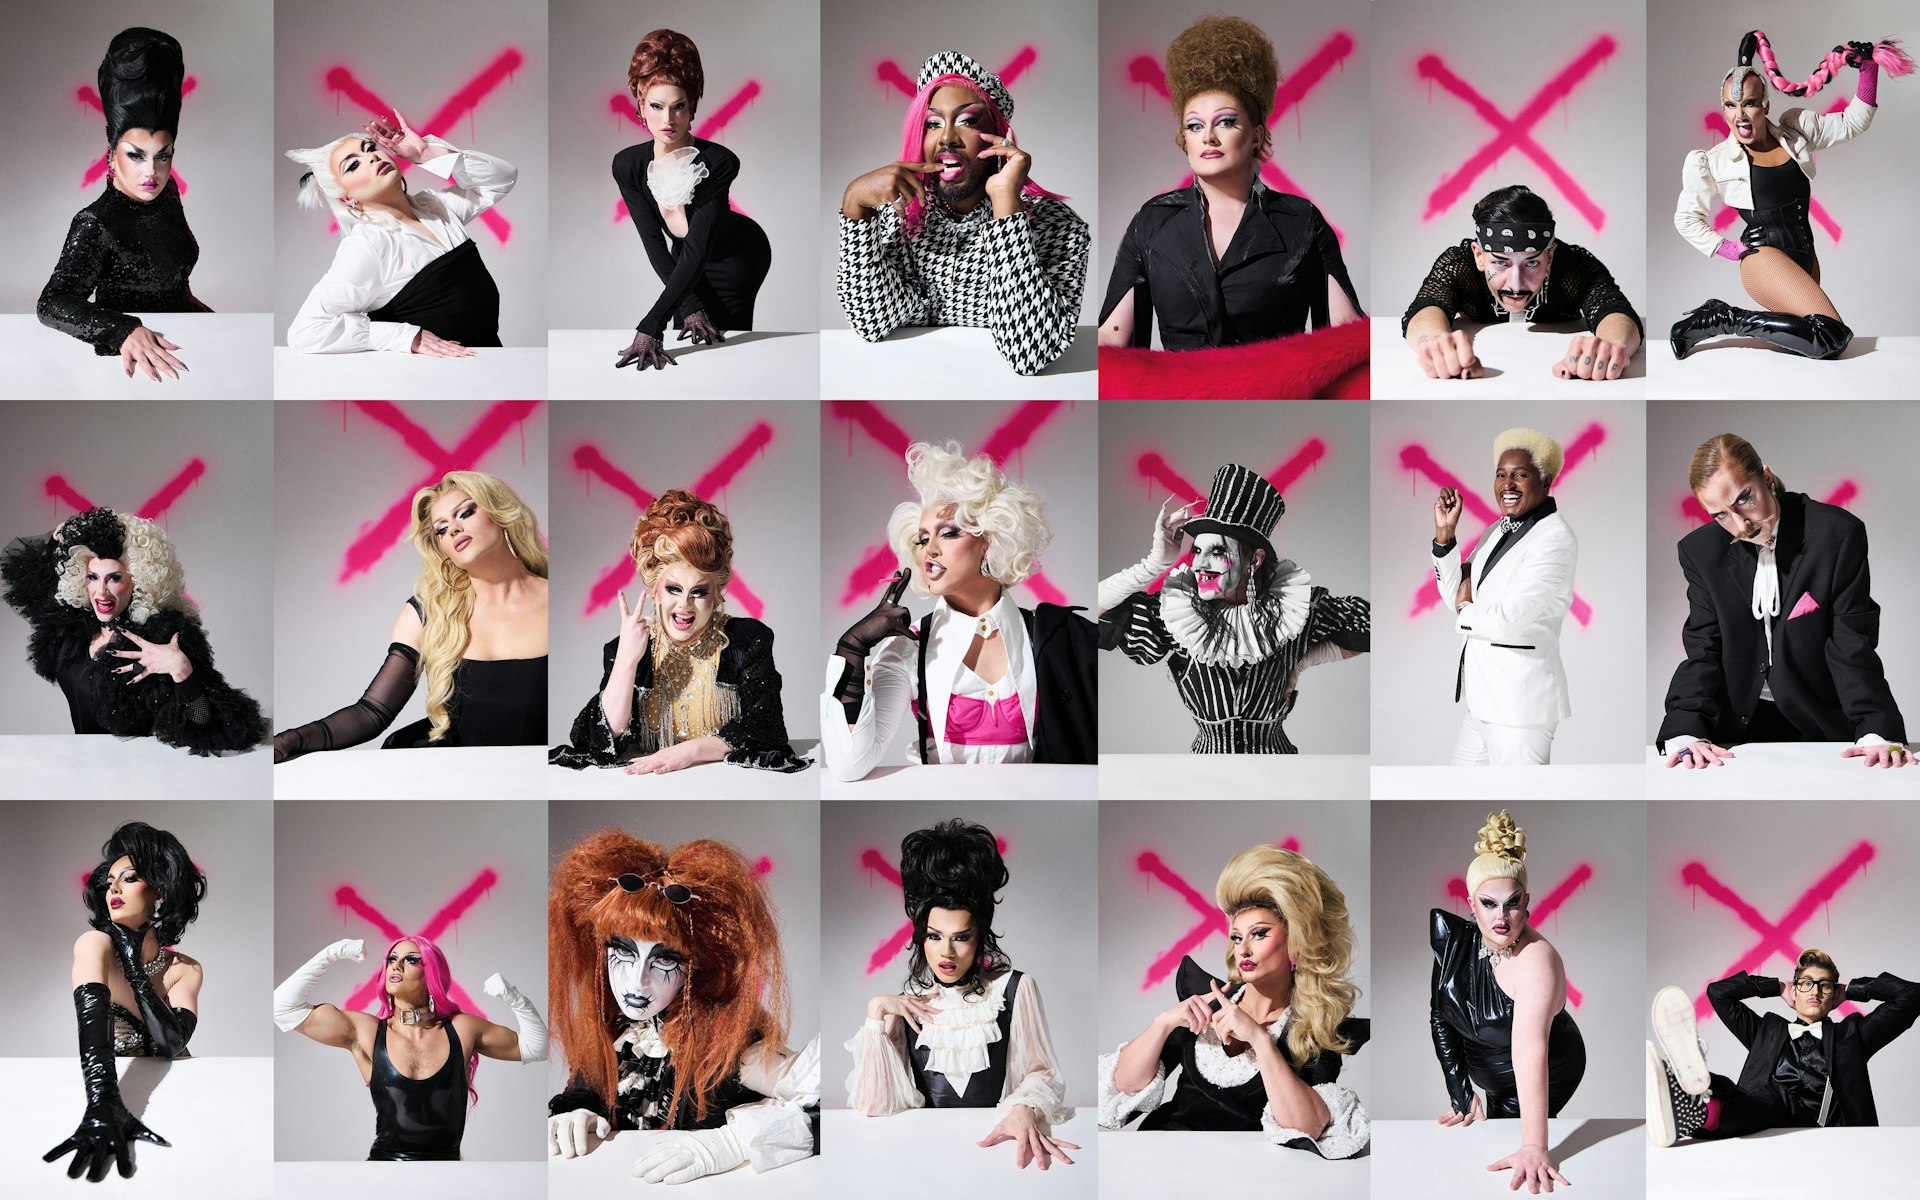 Drag artists unite to get out the vote, babes